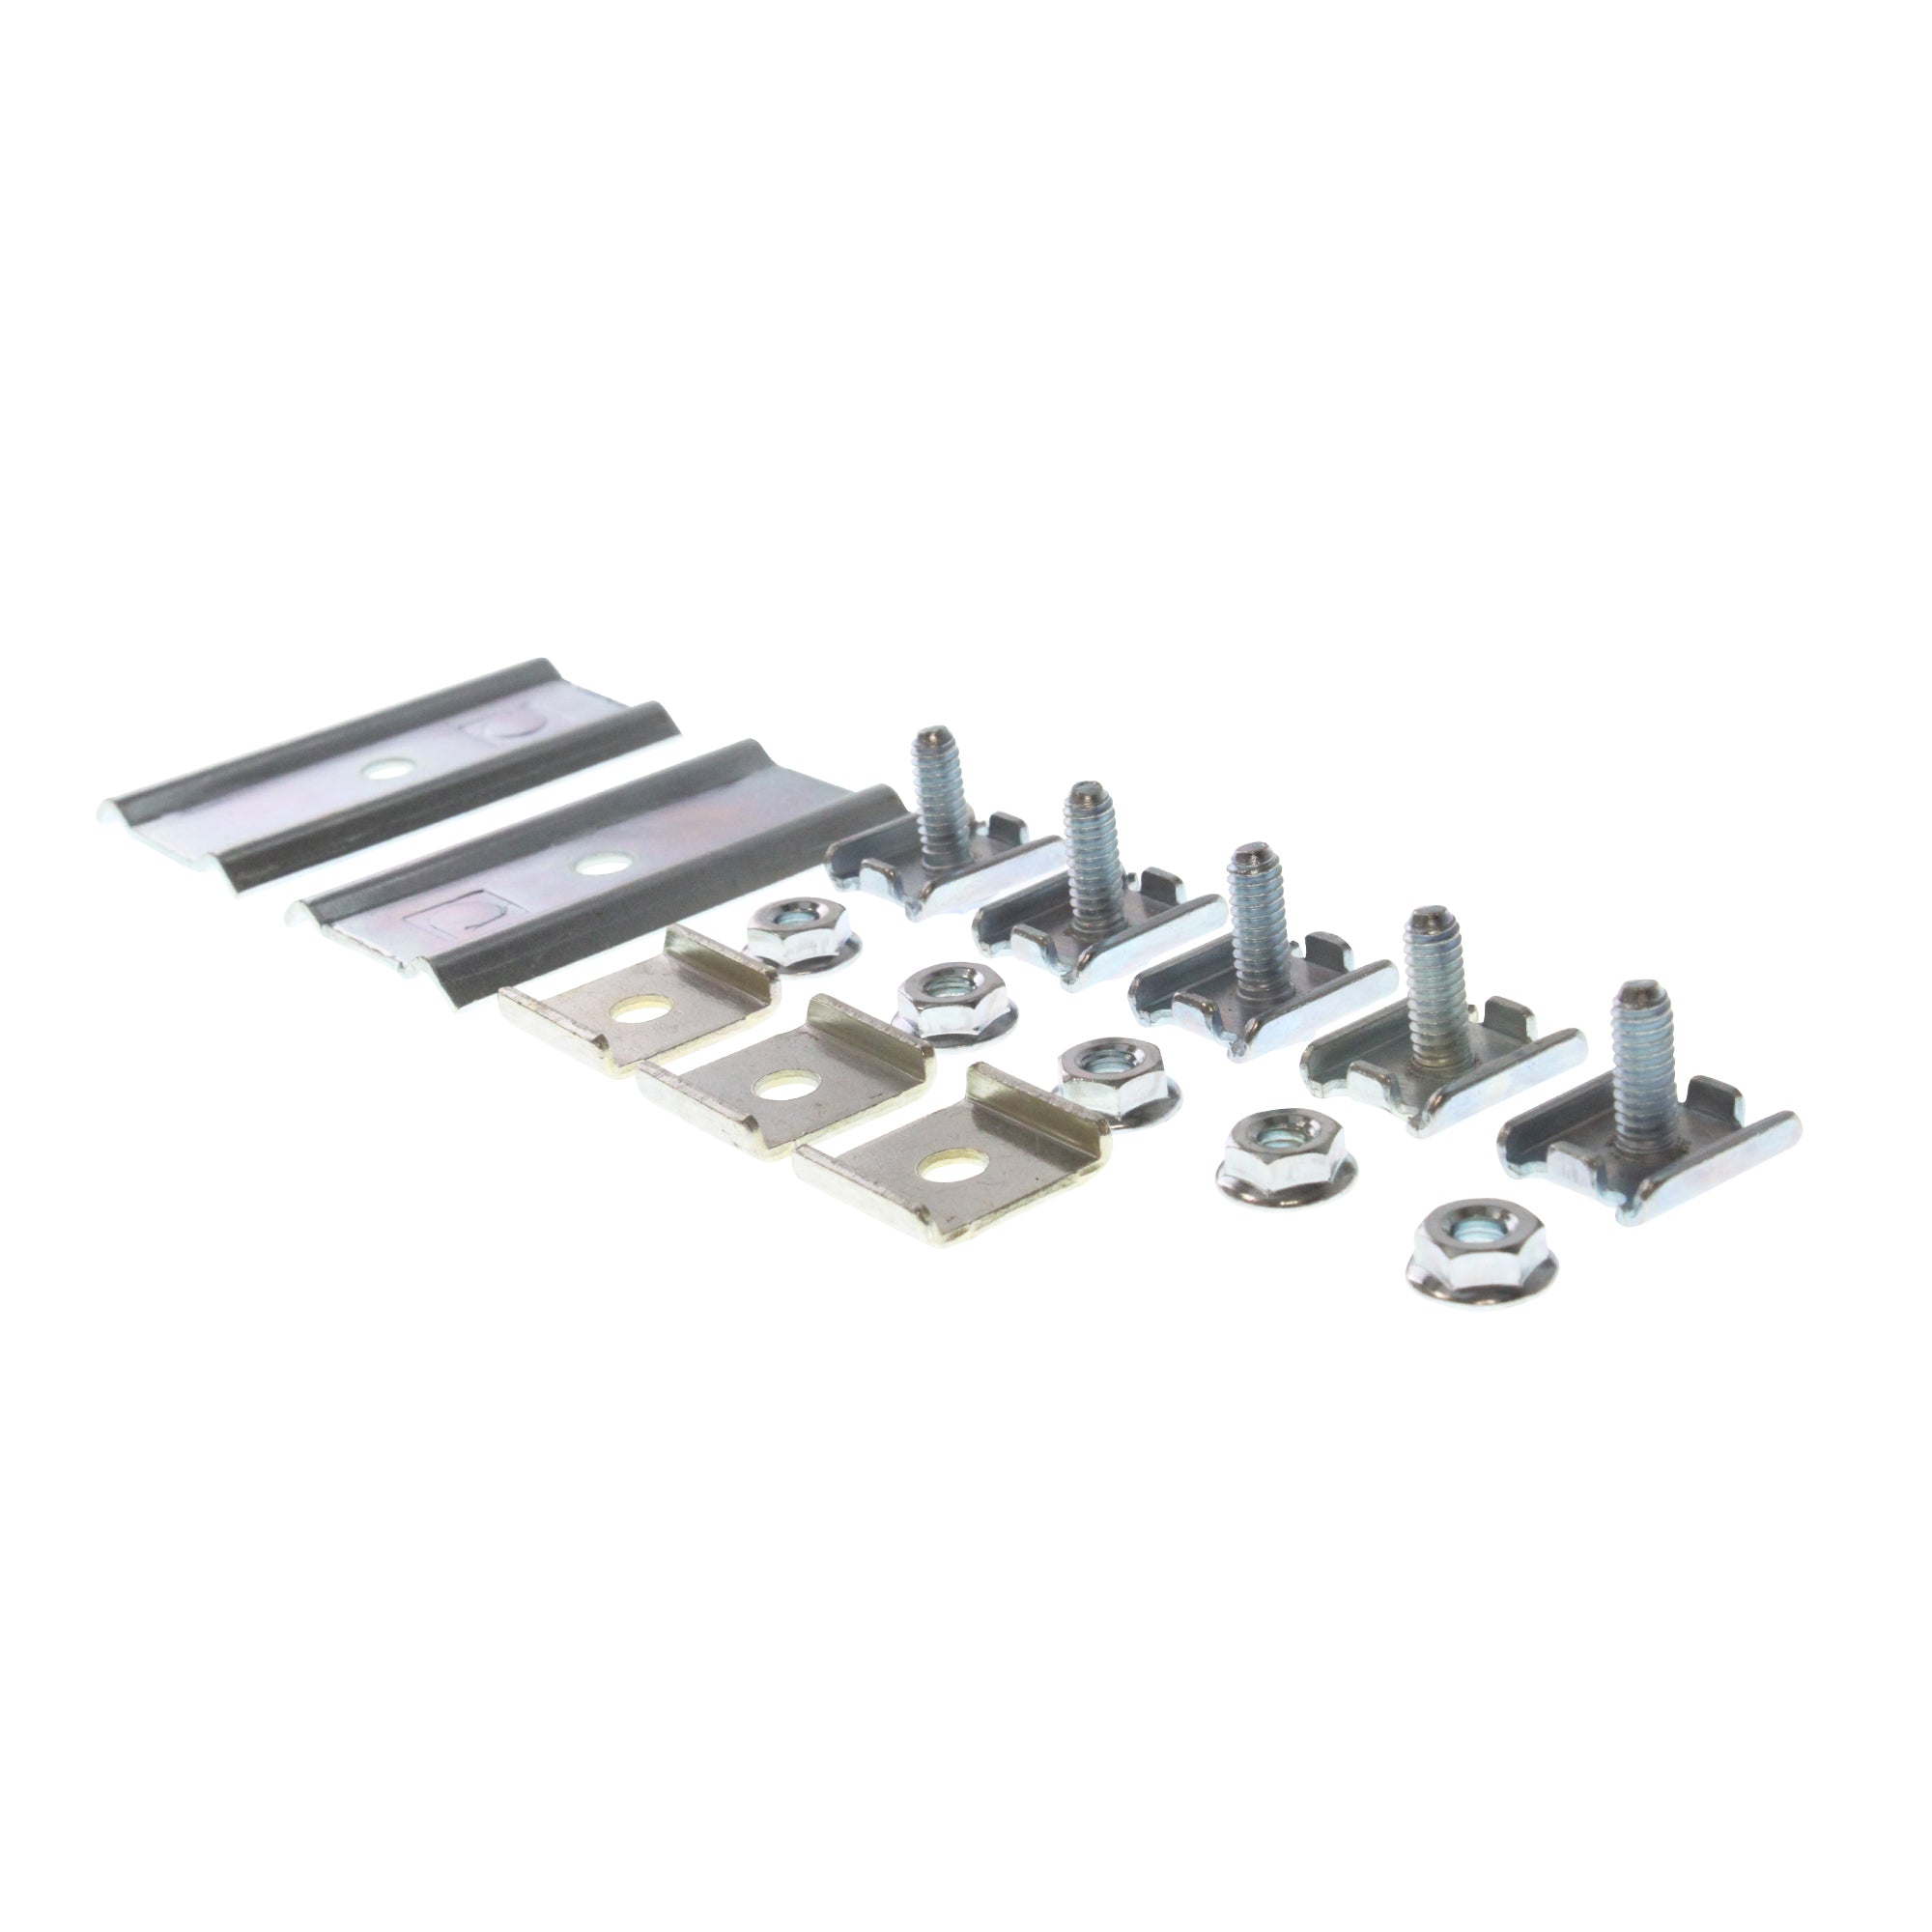 B-Line Systems, COOPER B-LINE WB43SK SPLICE PLATE KIT FOR WB200 CABLE FLEX TRAY (10-PACK)